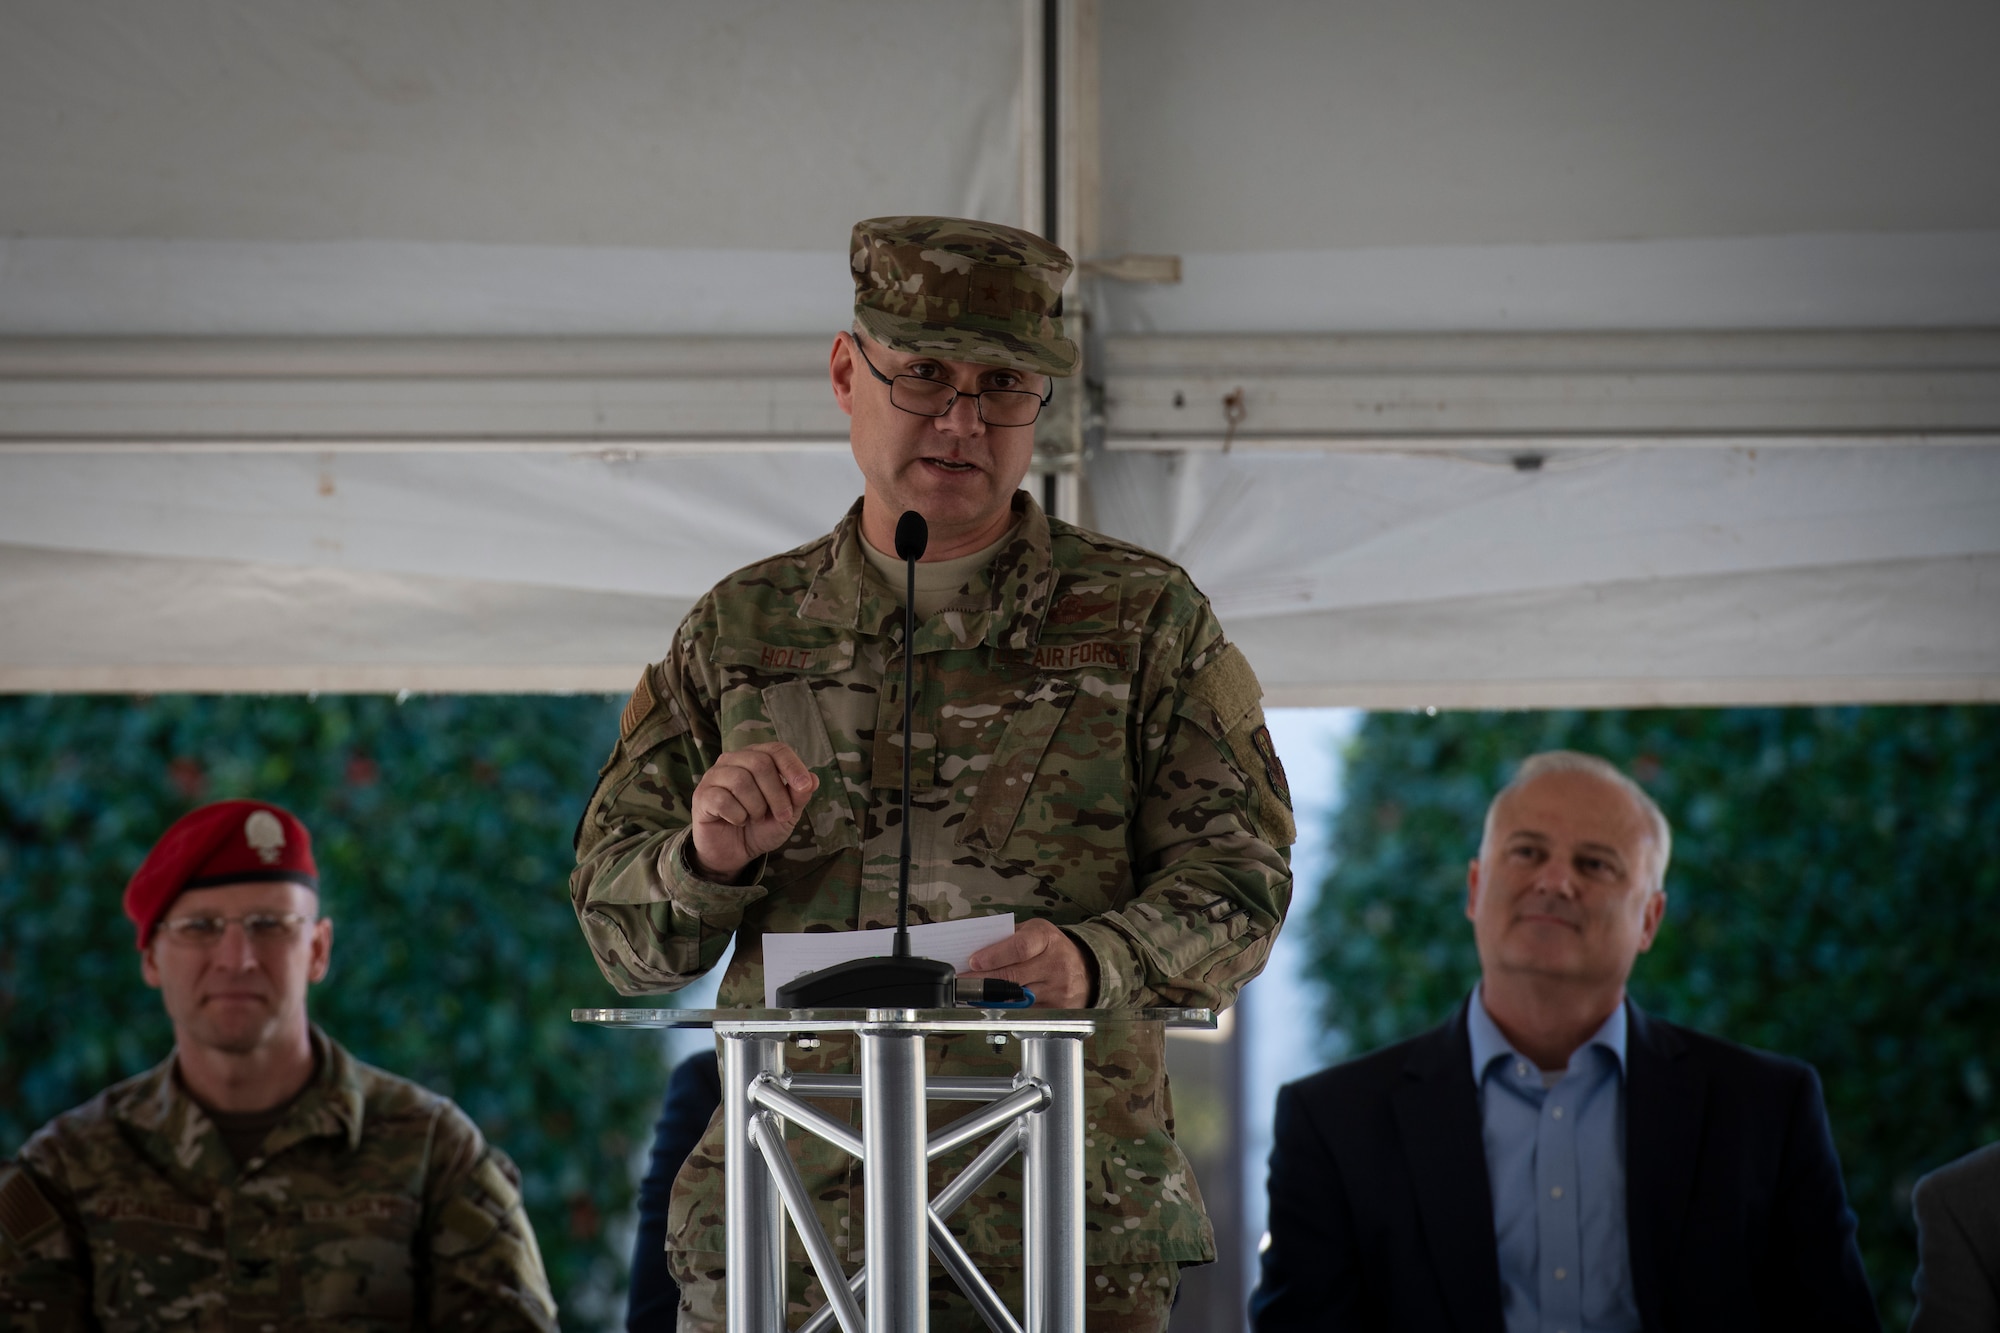 U.S. Air Force Brig. Gen. William Holt, the special assistant to the commander with Air Force Special Operations Command, gives remarks during a ribbon cutting and dedication ceremony in Fort Walton Beach, Florida, Jan. 11, 2018.